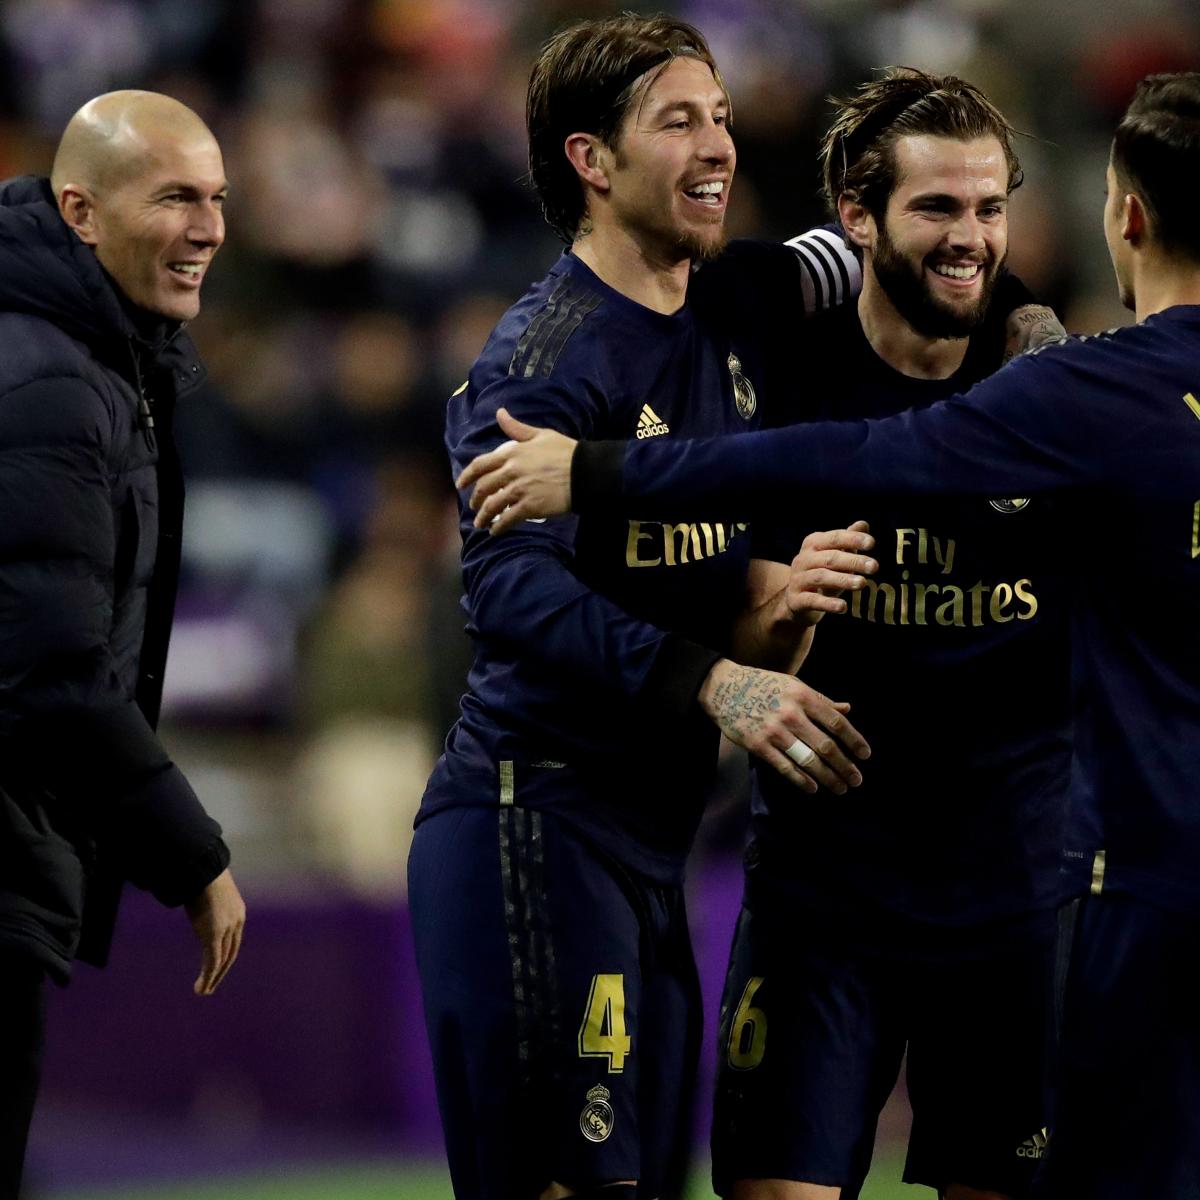 La Liga Winners And Losers After Final 2020 Week 21 Table